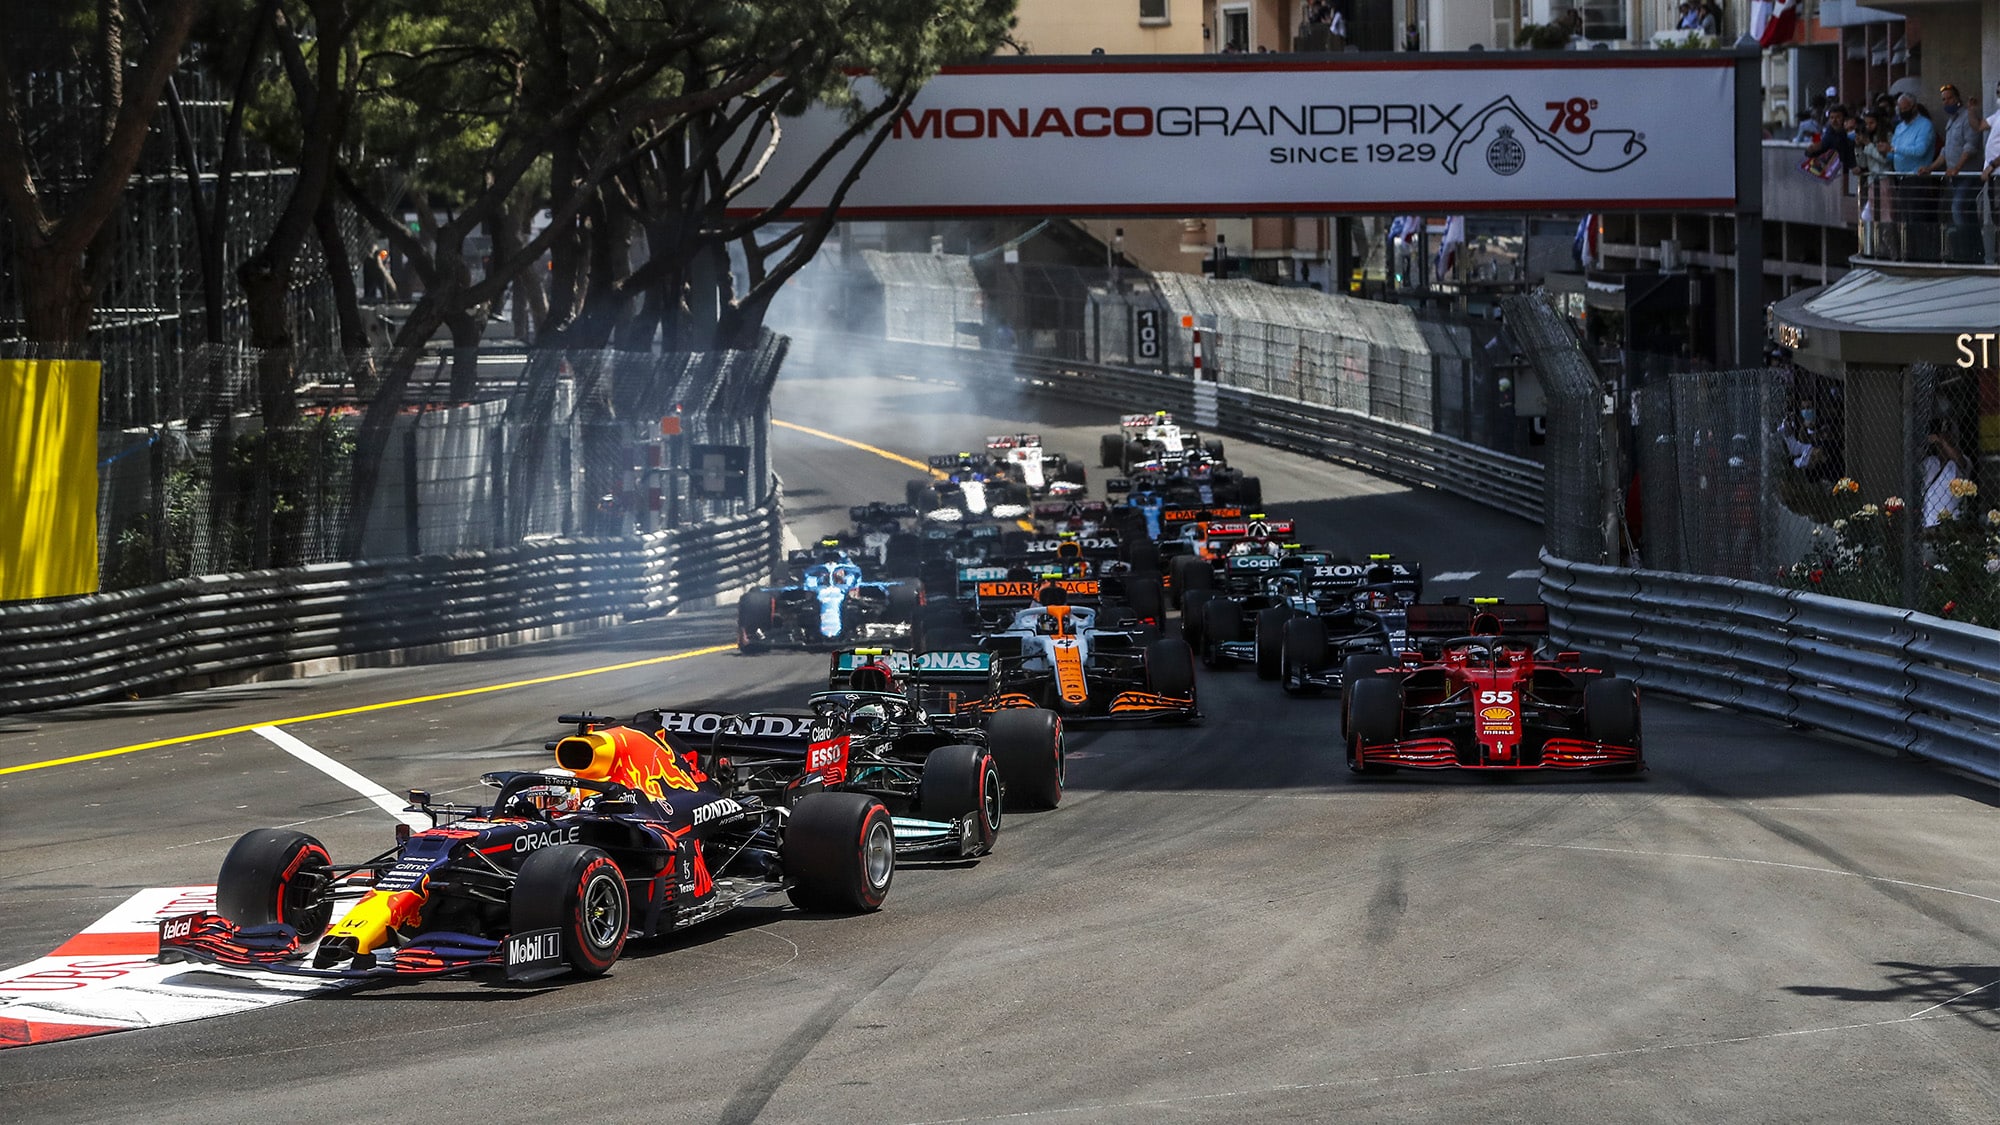 Max Verstappen leads at the start of the 2021 monaco Grand Prix